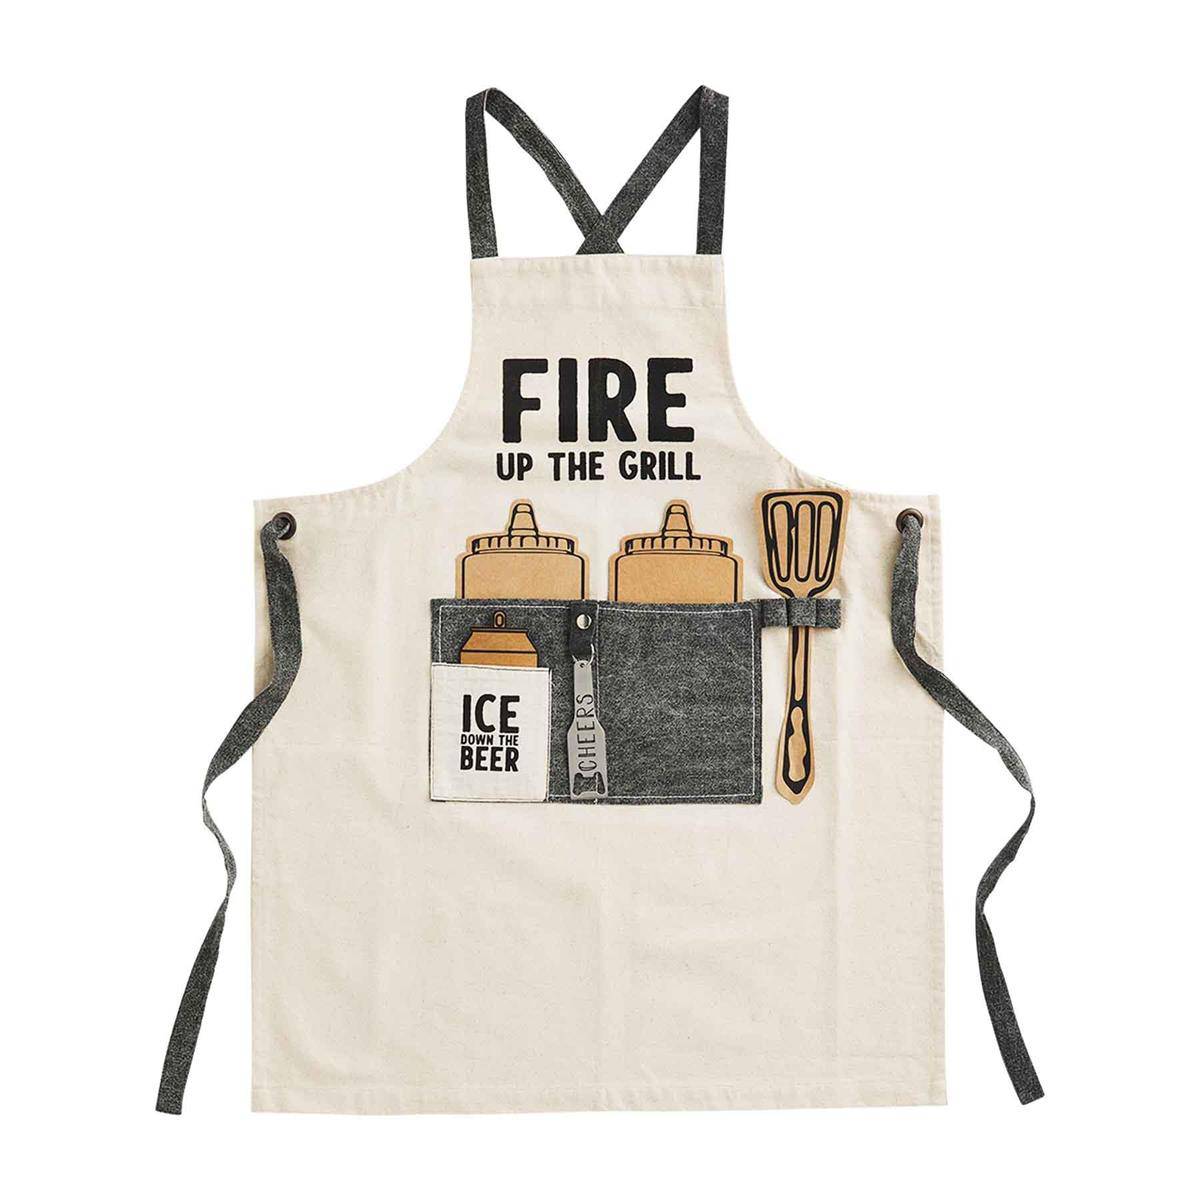 FIRE UP THE GRILL APRON - Findlay Rowe Designs